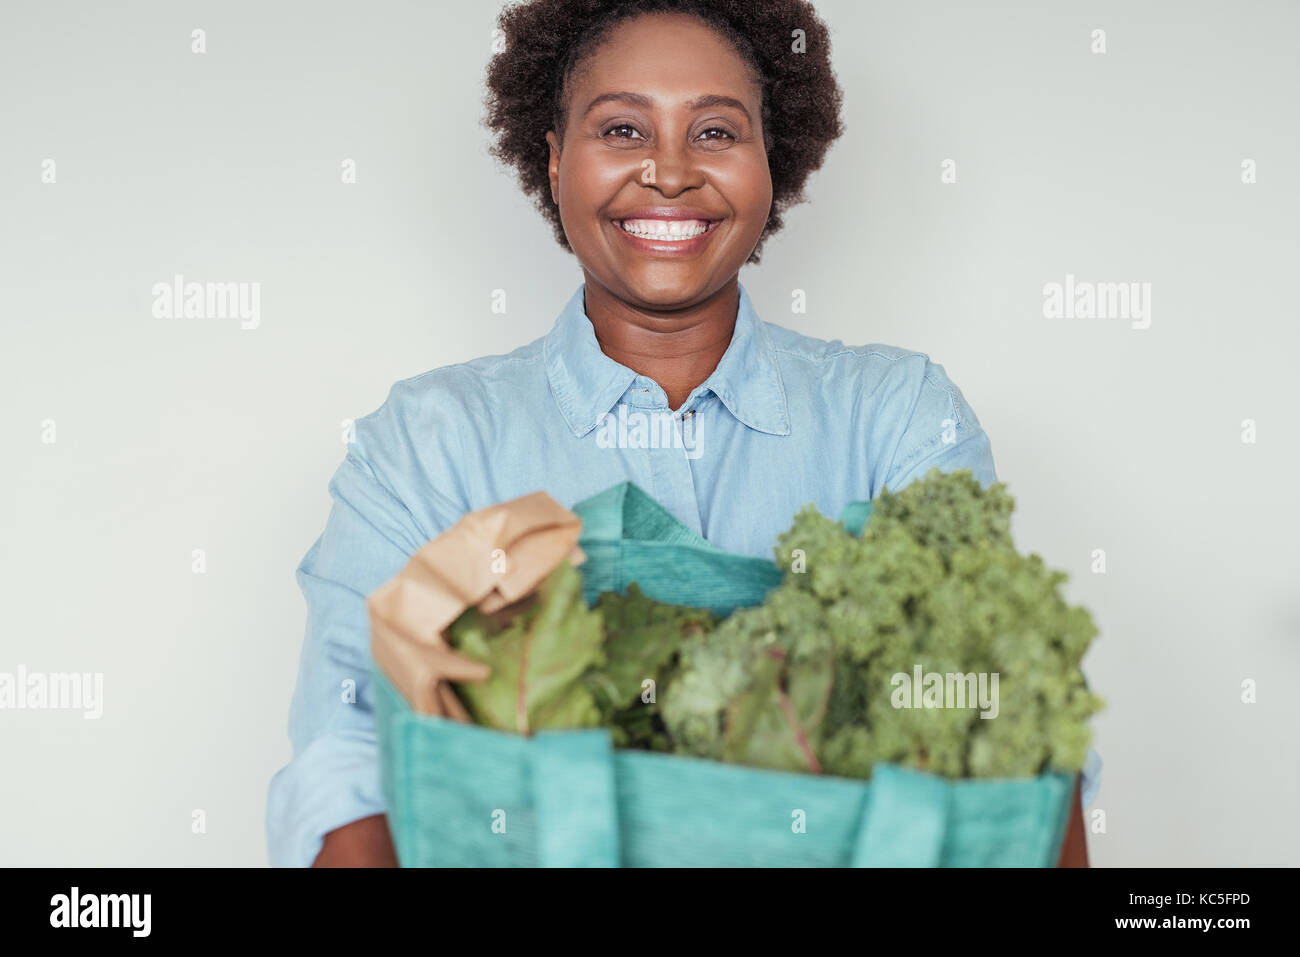 Smiling young African woman holding a bag of groceries Stock Photo